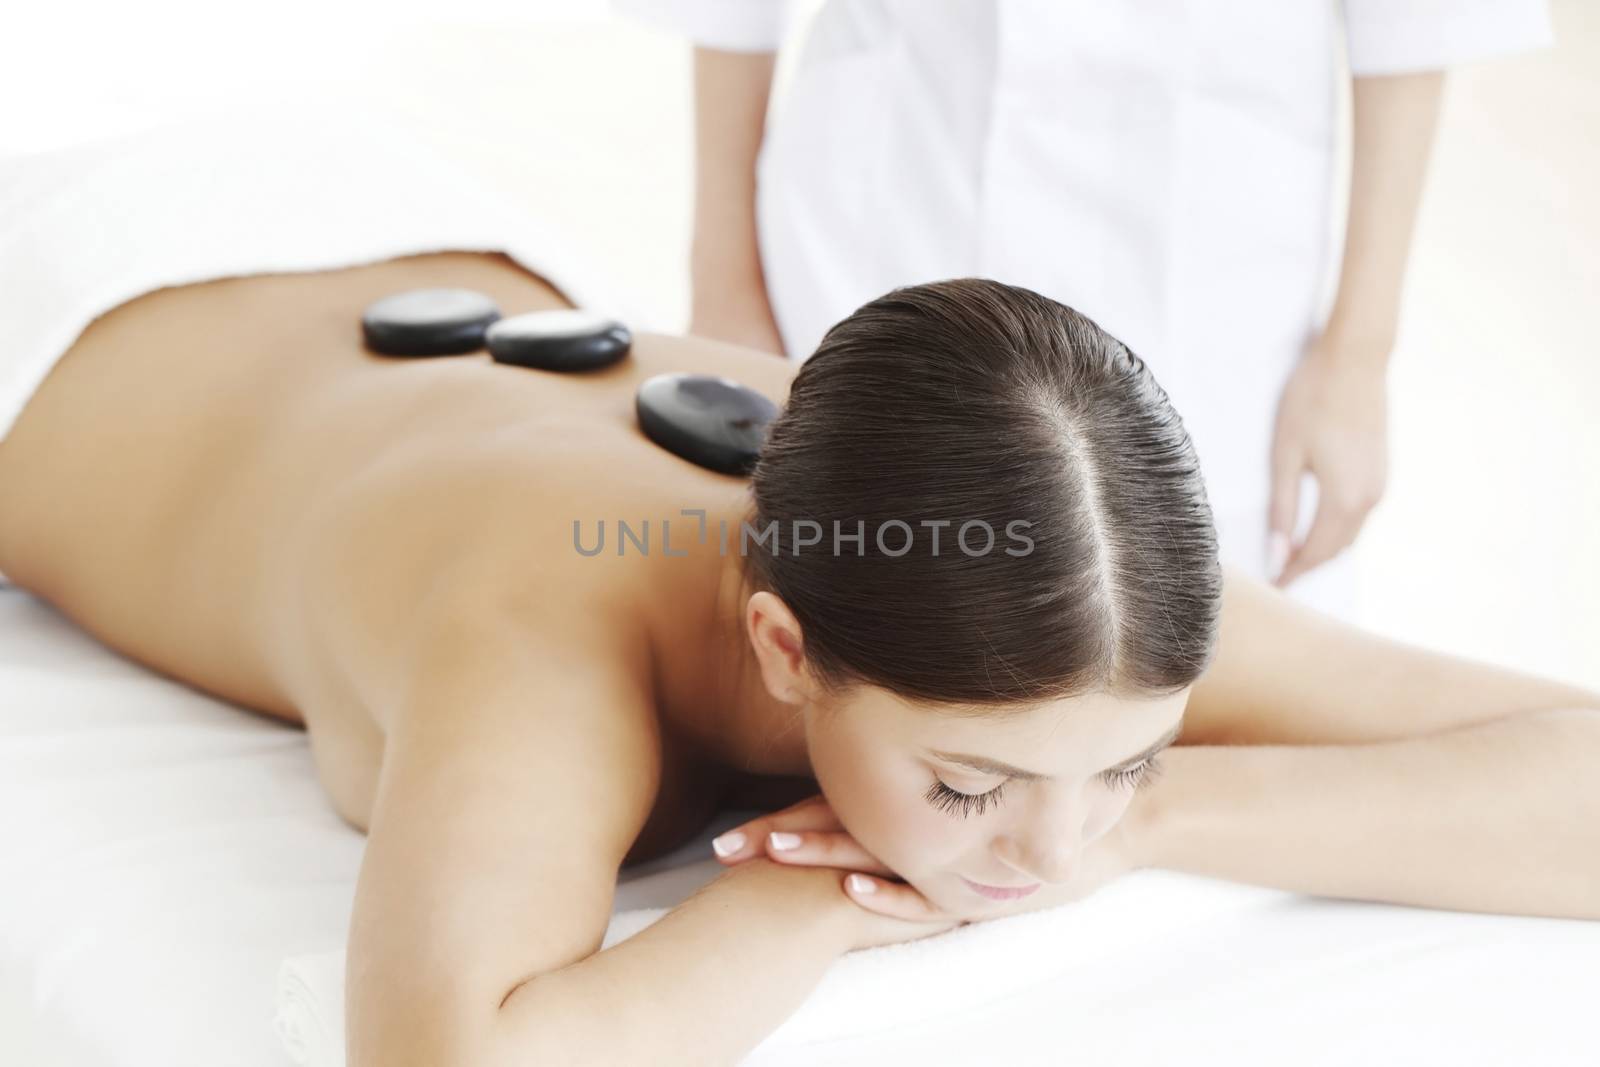 Girl on a stone therapy, hot stone massage